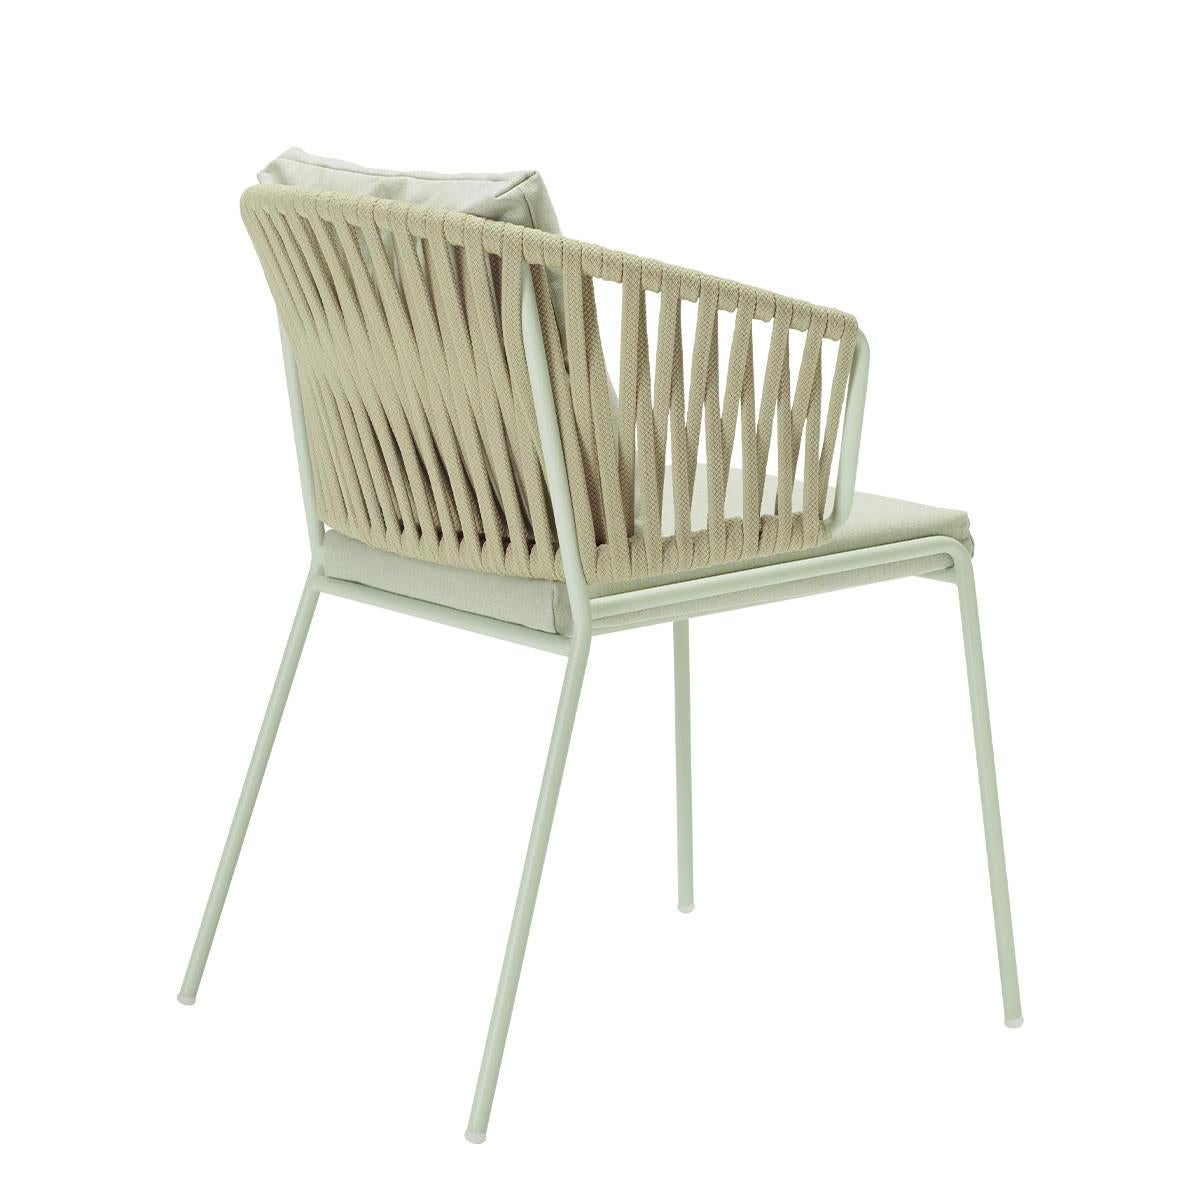 Pair of Cream Outdoor or Indoor Metal and Cord Armchairs, 21 century
Modern production armchair for outdoors or indoors. The structure is in metal and reinforced by the ropes on the back. This armchair has an innovative, modern and fresh design.
The